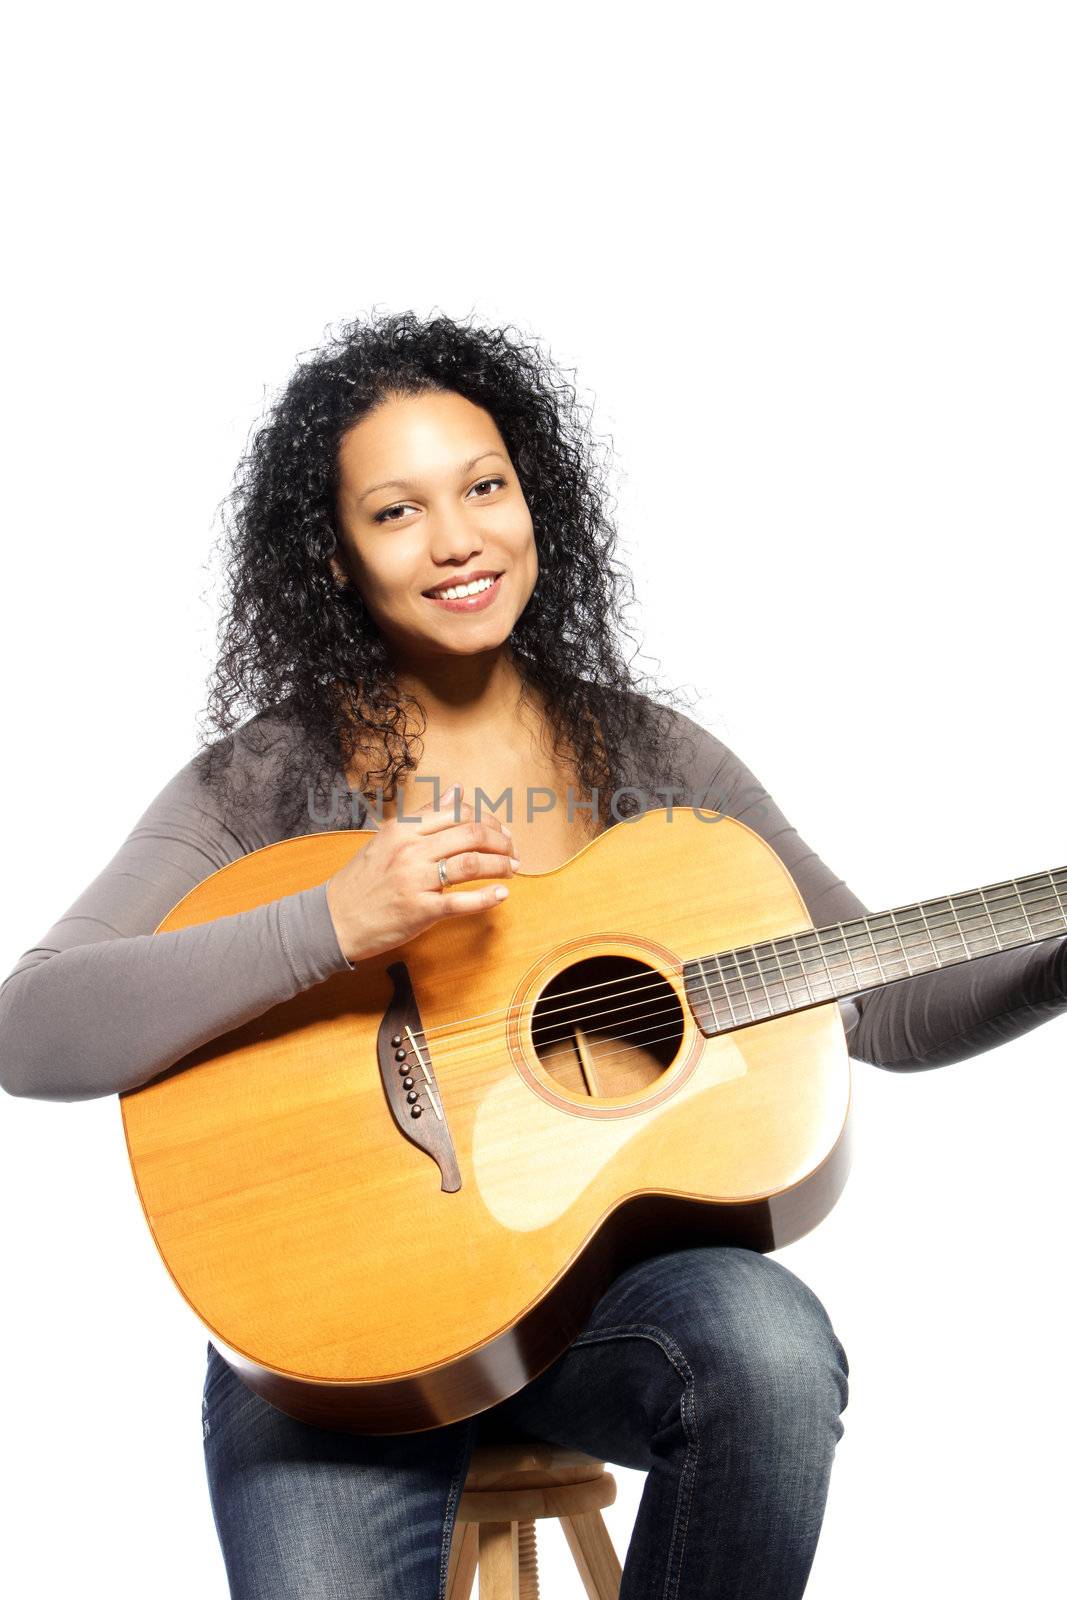 Smiling woman posing with guitar over the white background